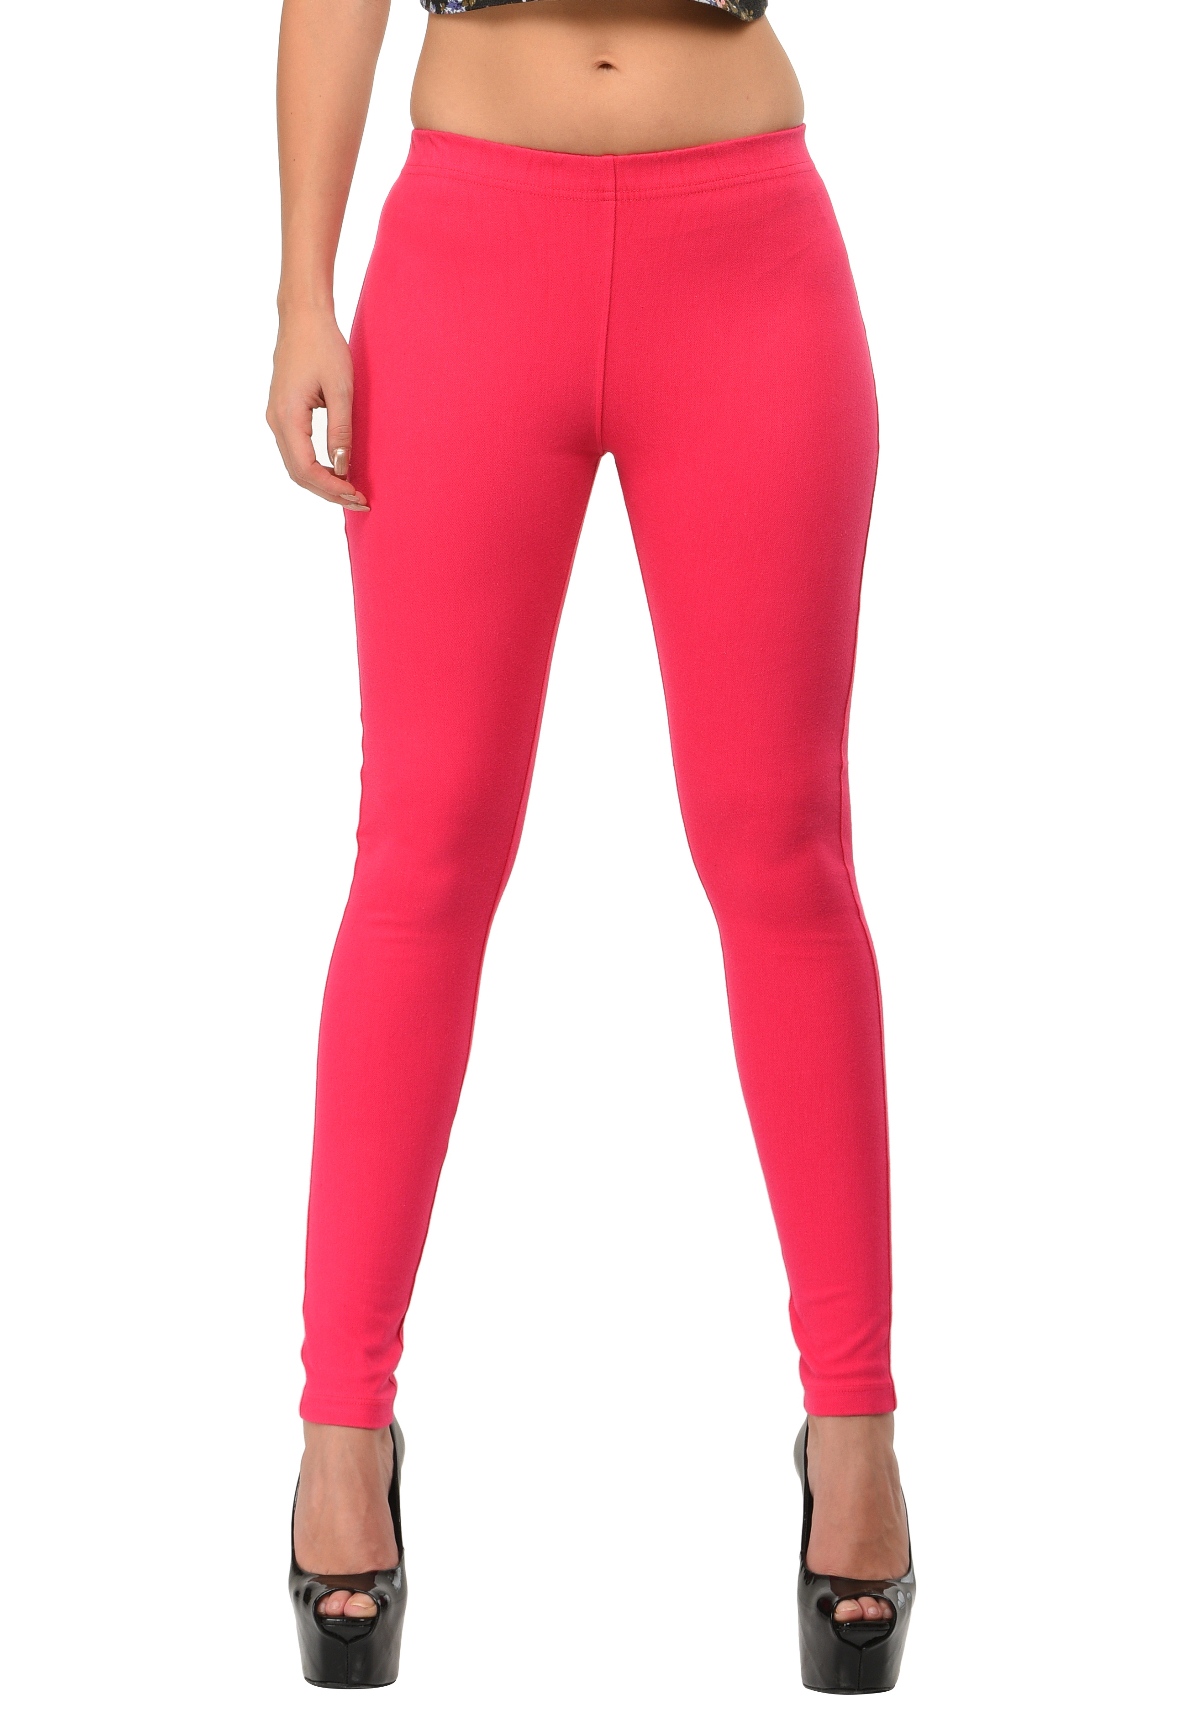 Top more than 287 frenchtrendz leggings online latest